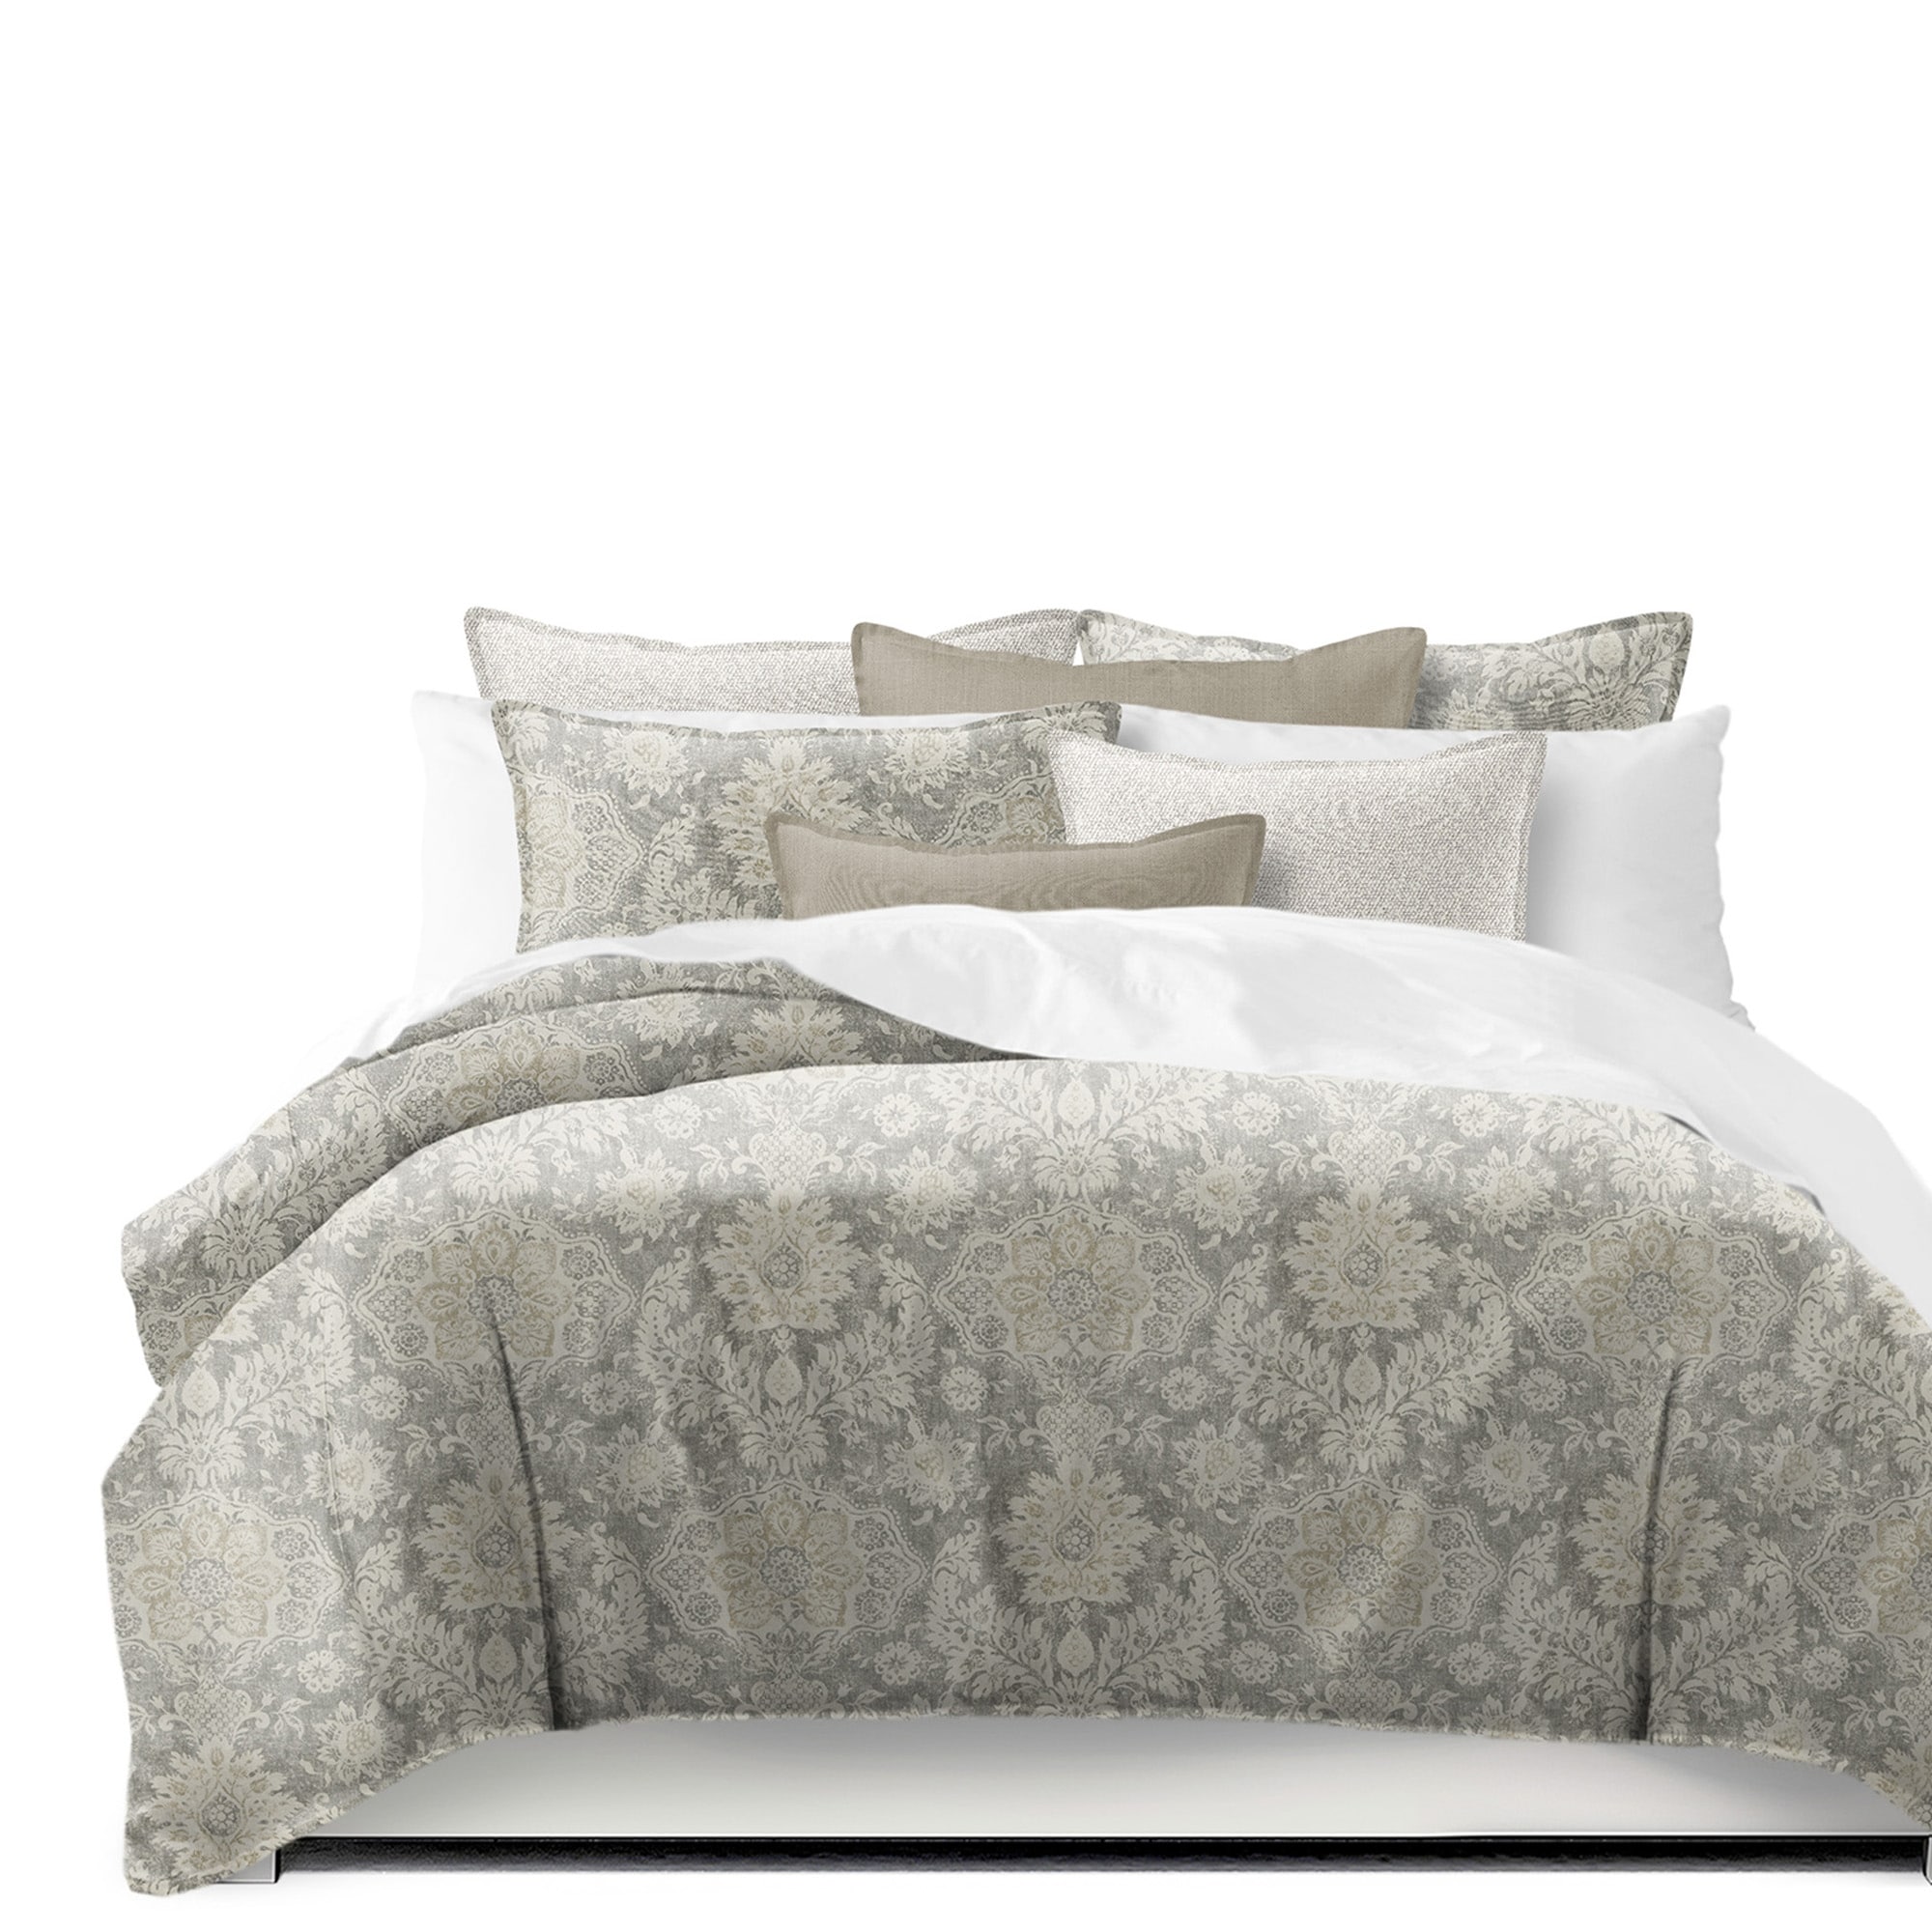 Twin Size Toile Comforters and Sets - Bed Bath & Beyond